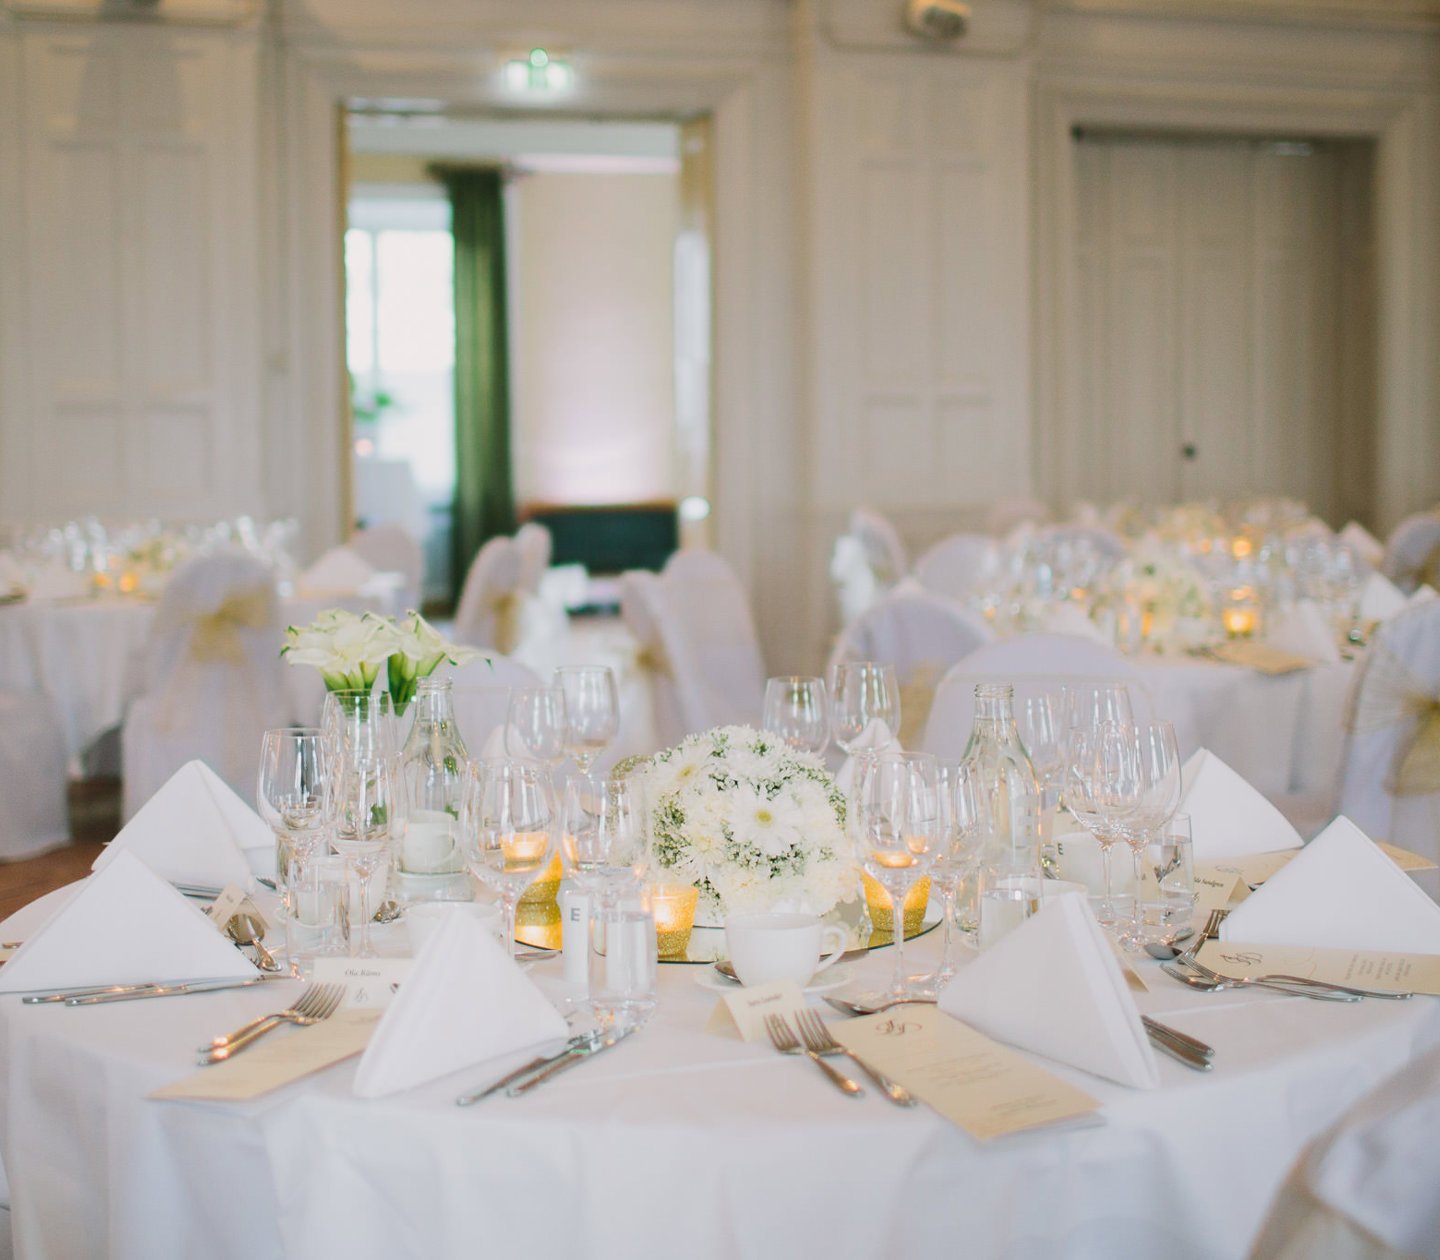 Table with white tablecloths in banquet hall